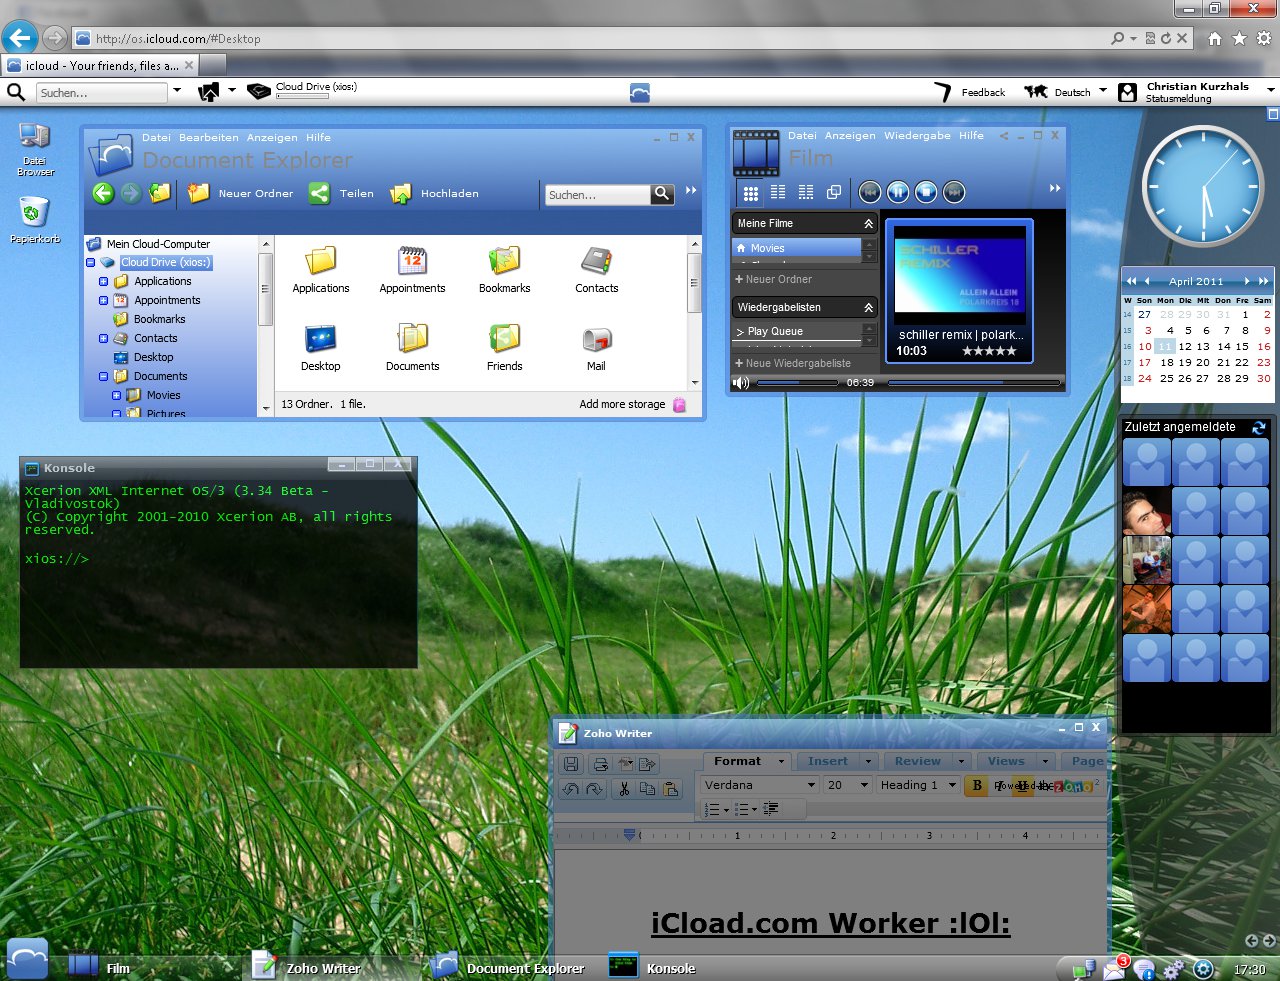 CloudMe for Mac OS X